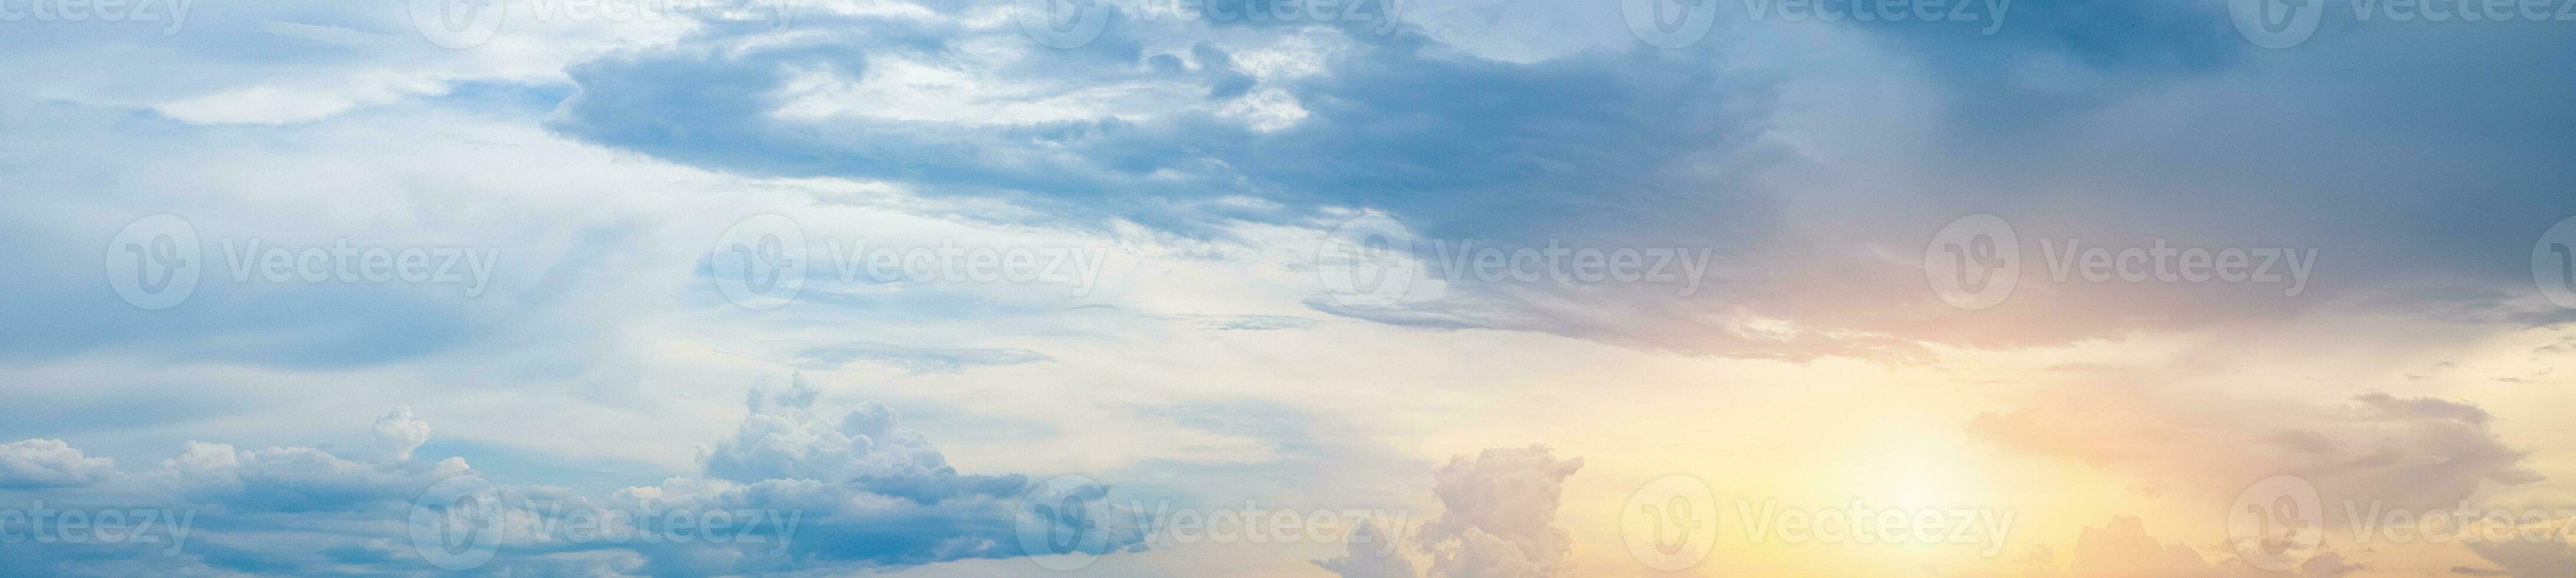 Beautiful blue sky with white clouds and sun photo